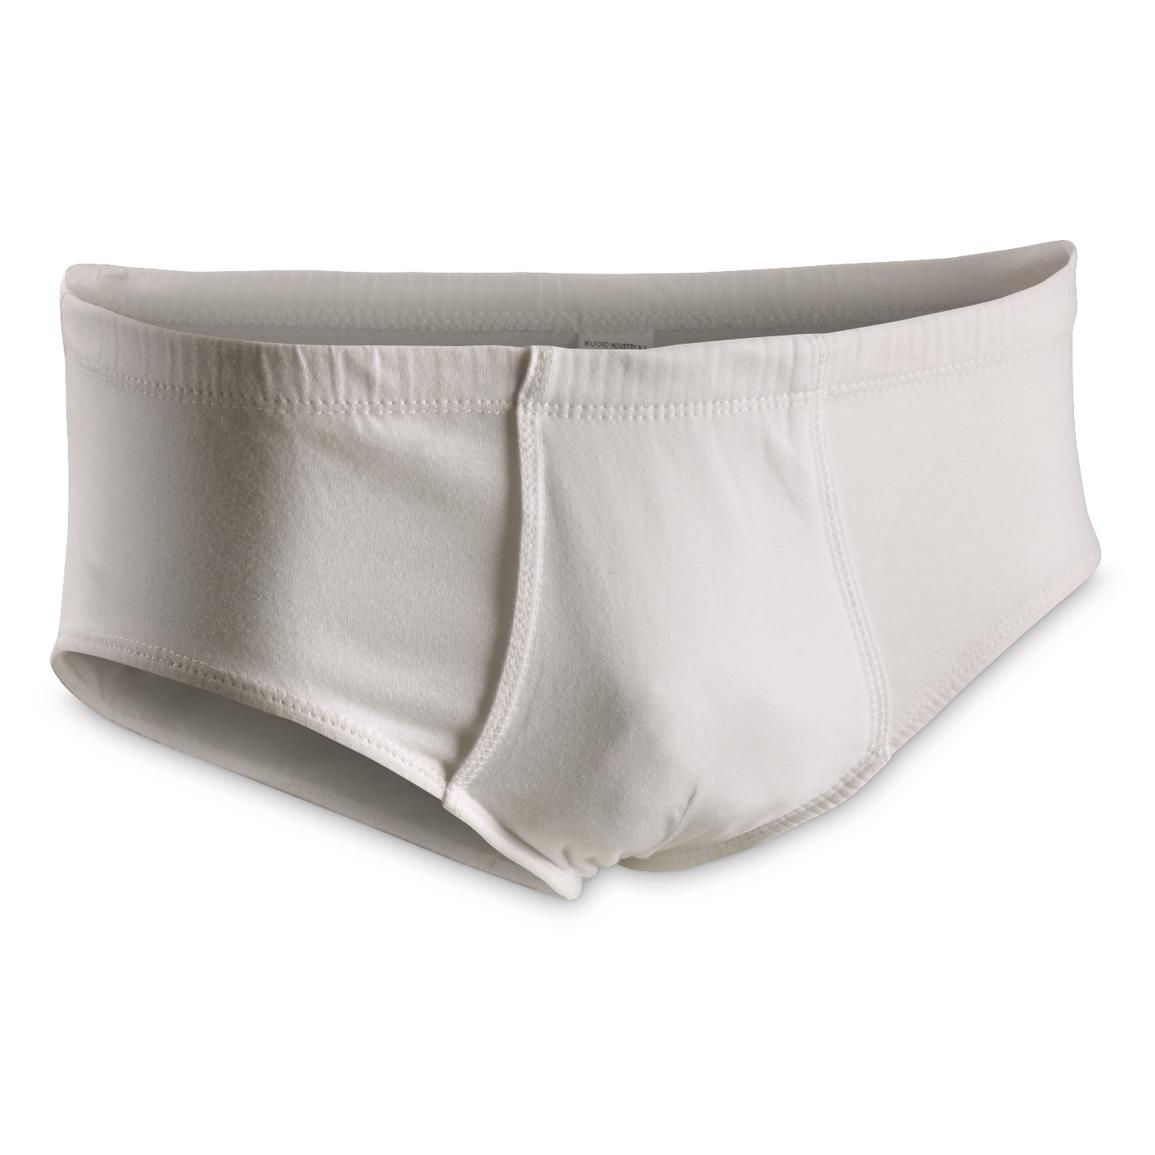 Belgian Military Surplus White Briefs, 6 Pack, New - 715860, Military  Underwear & Long Johns at Sportsman's Guide